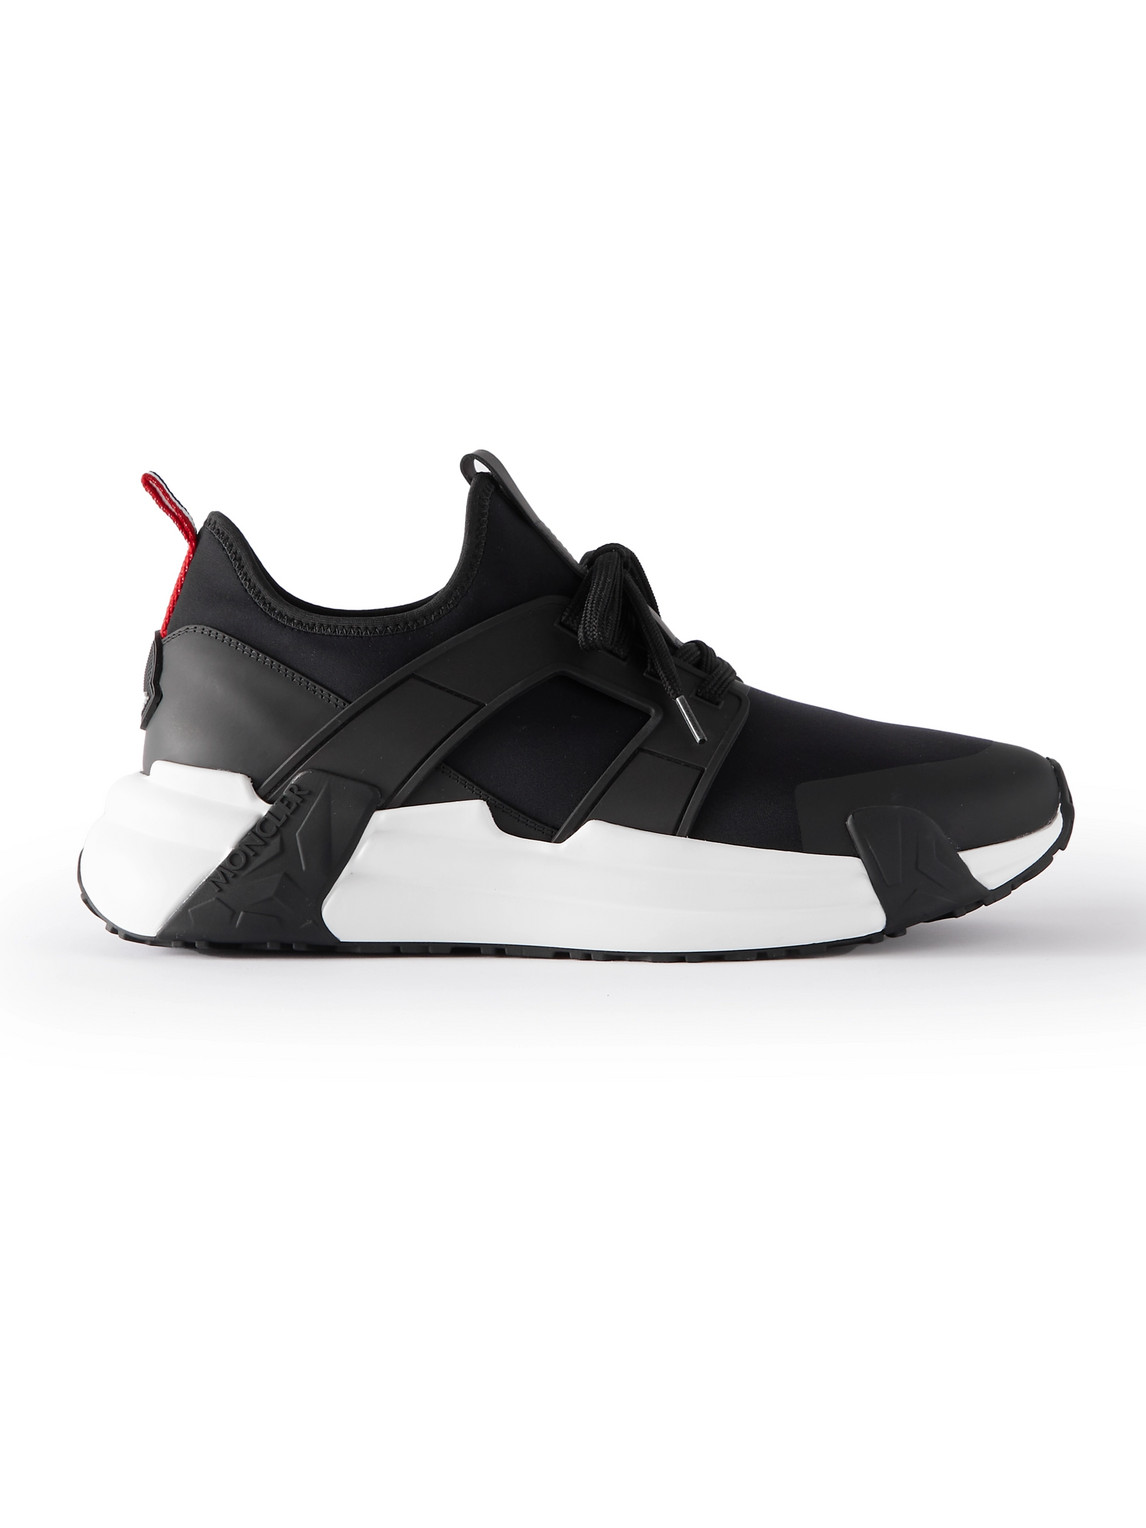 Lunarove Rubber and Leather-Trimmed Neoprene Sneakers